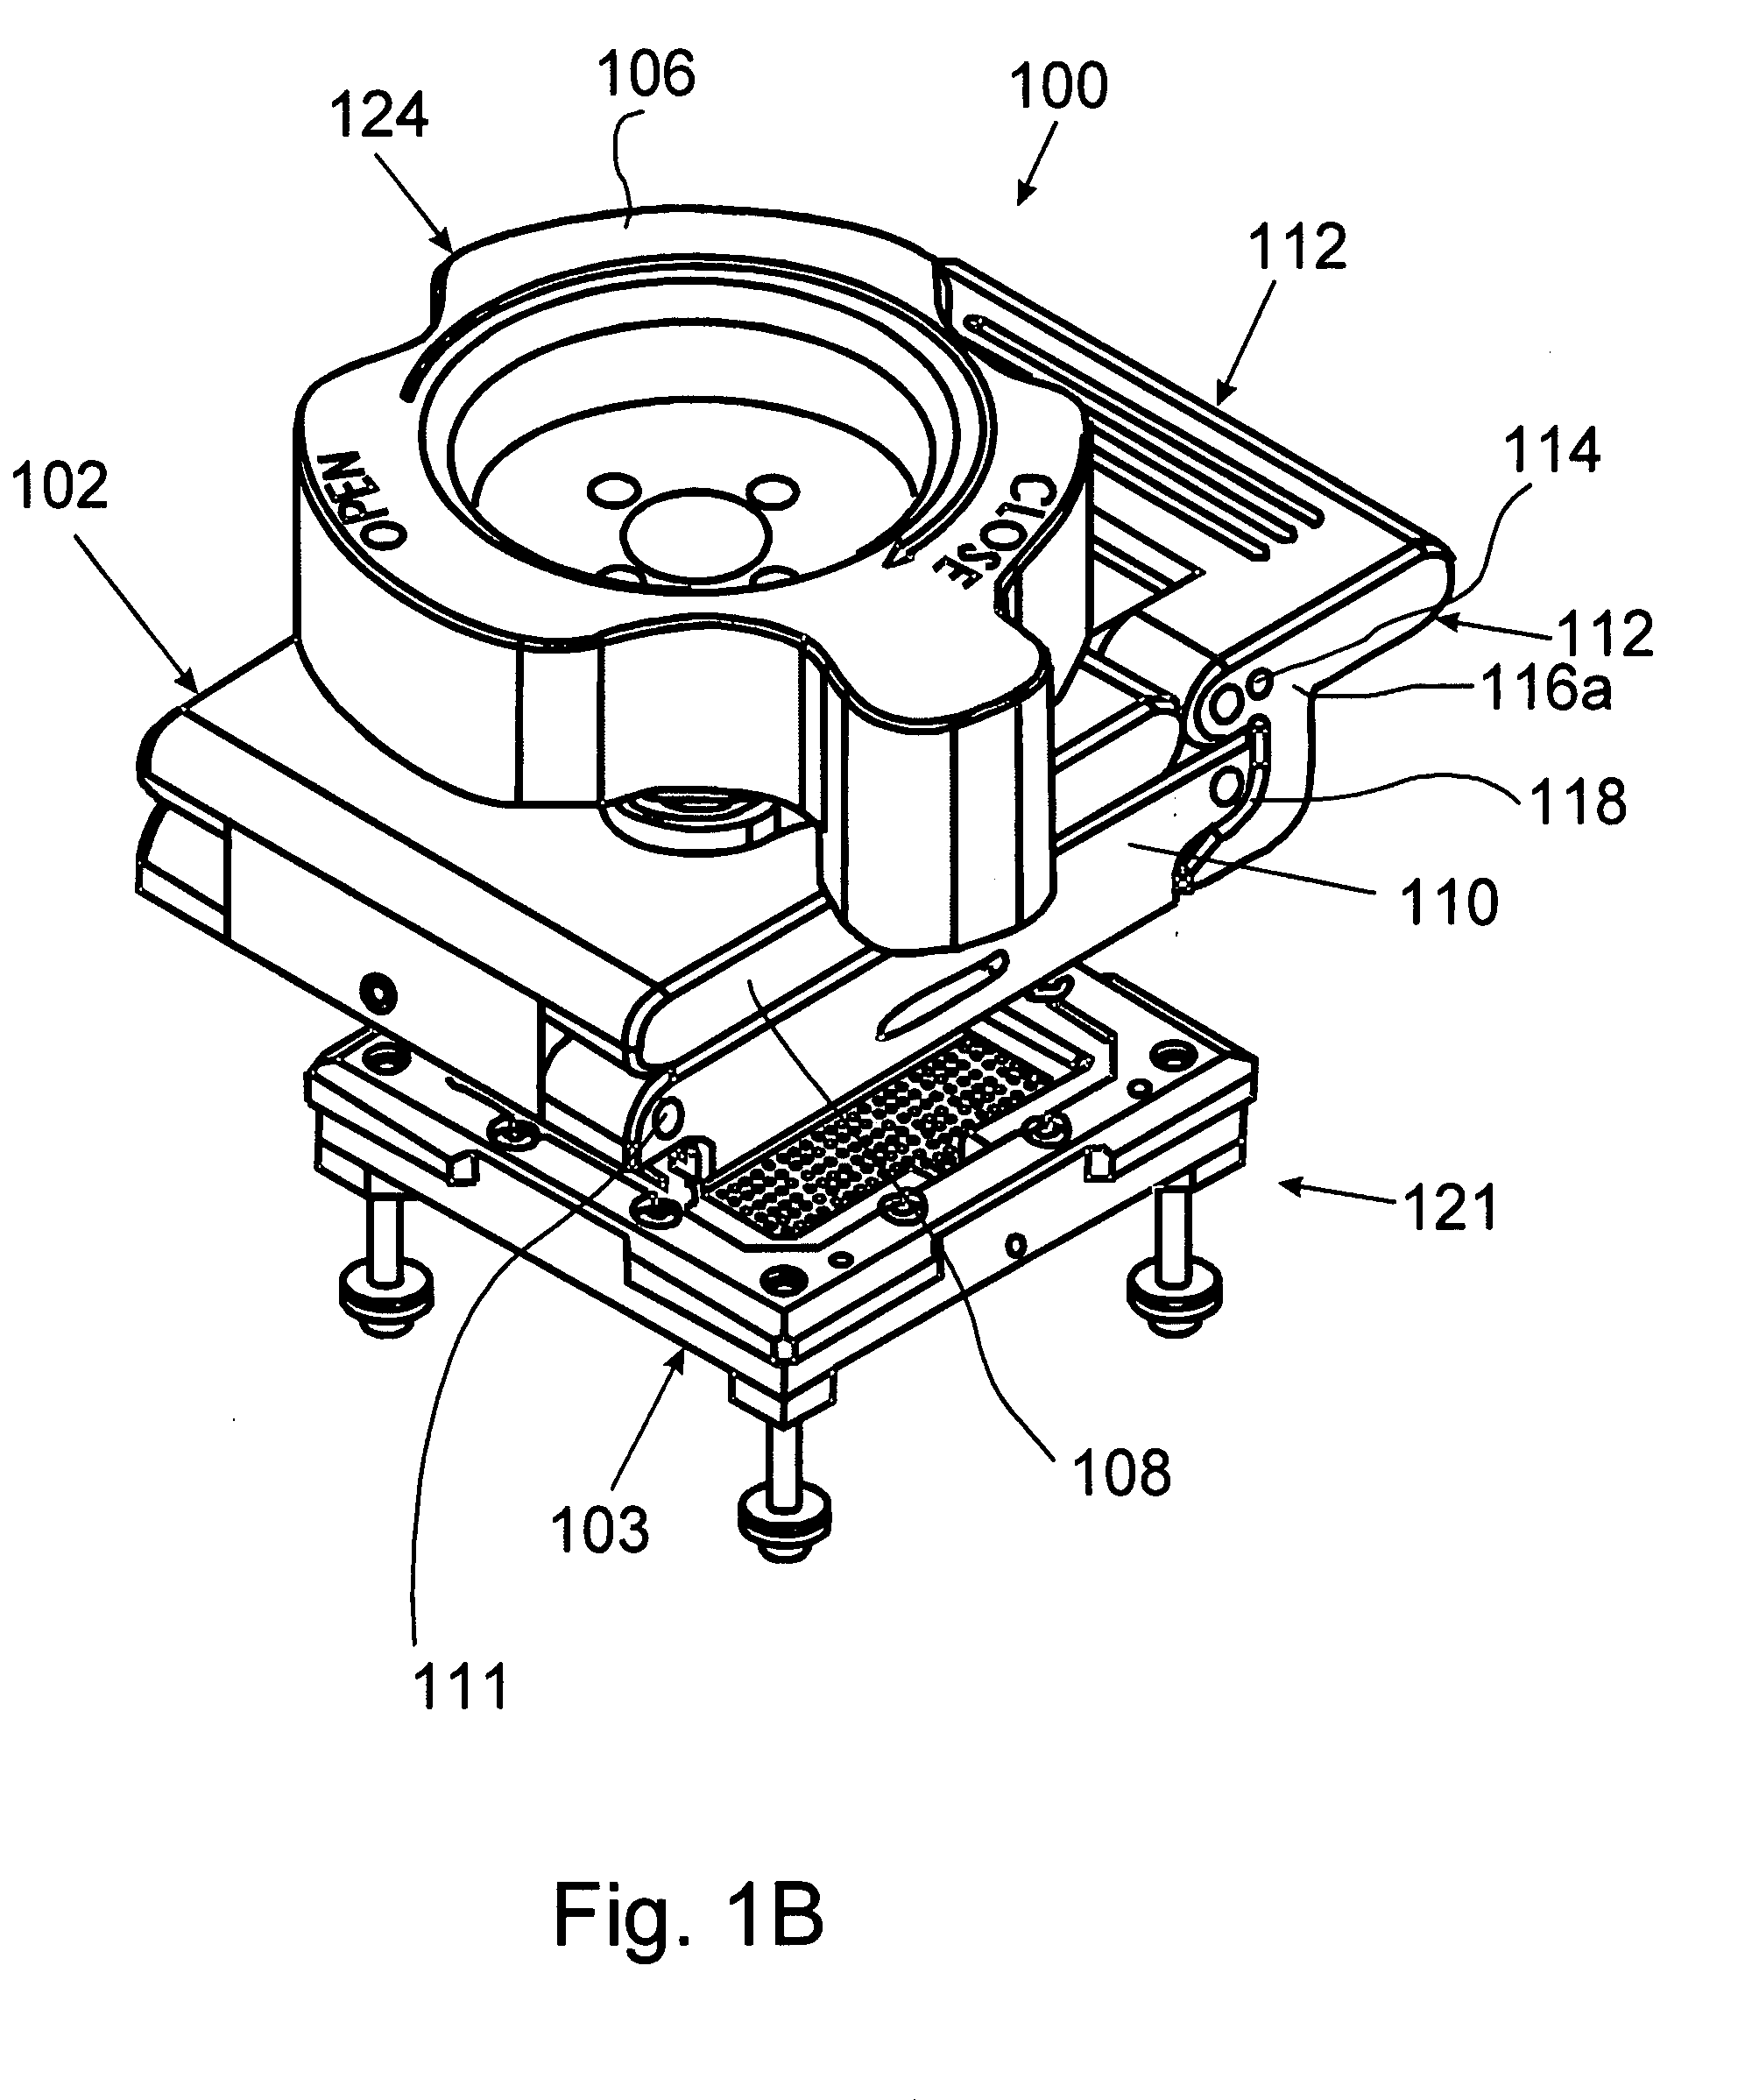 Object-clamping lid subassembly of a test socket for testing electrical characteristics of an object